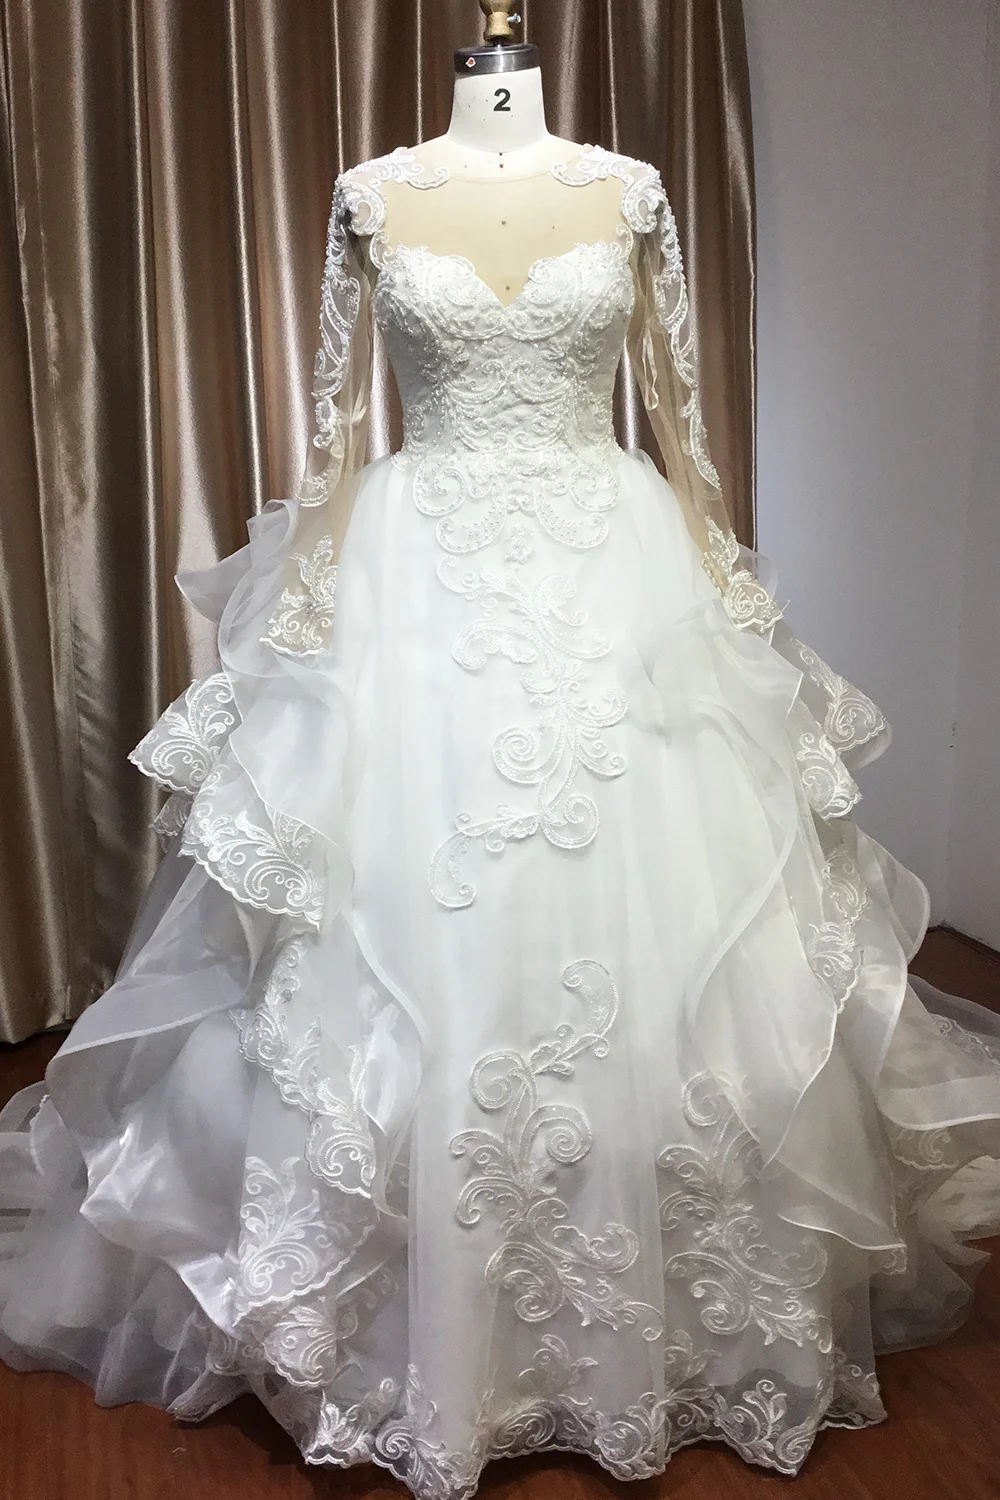 Long Sleeve Ruffles Ball Gown Wedding Dress With Lace Appliques